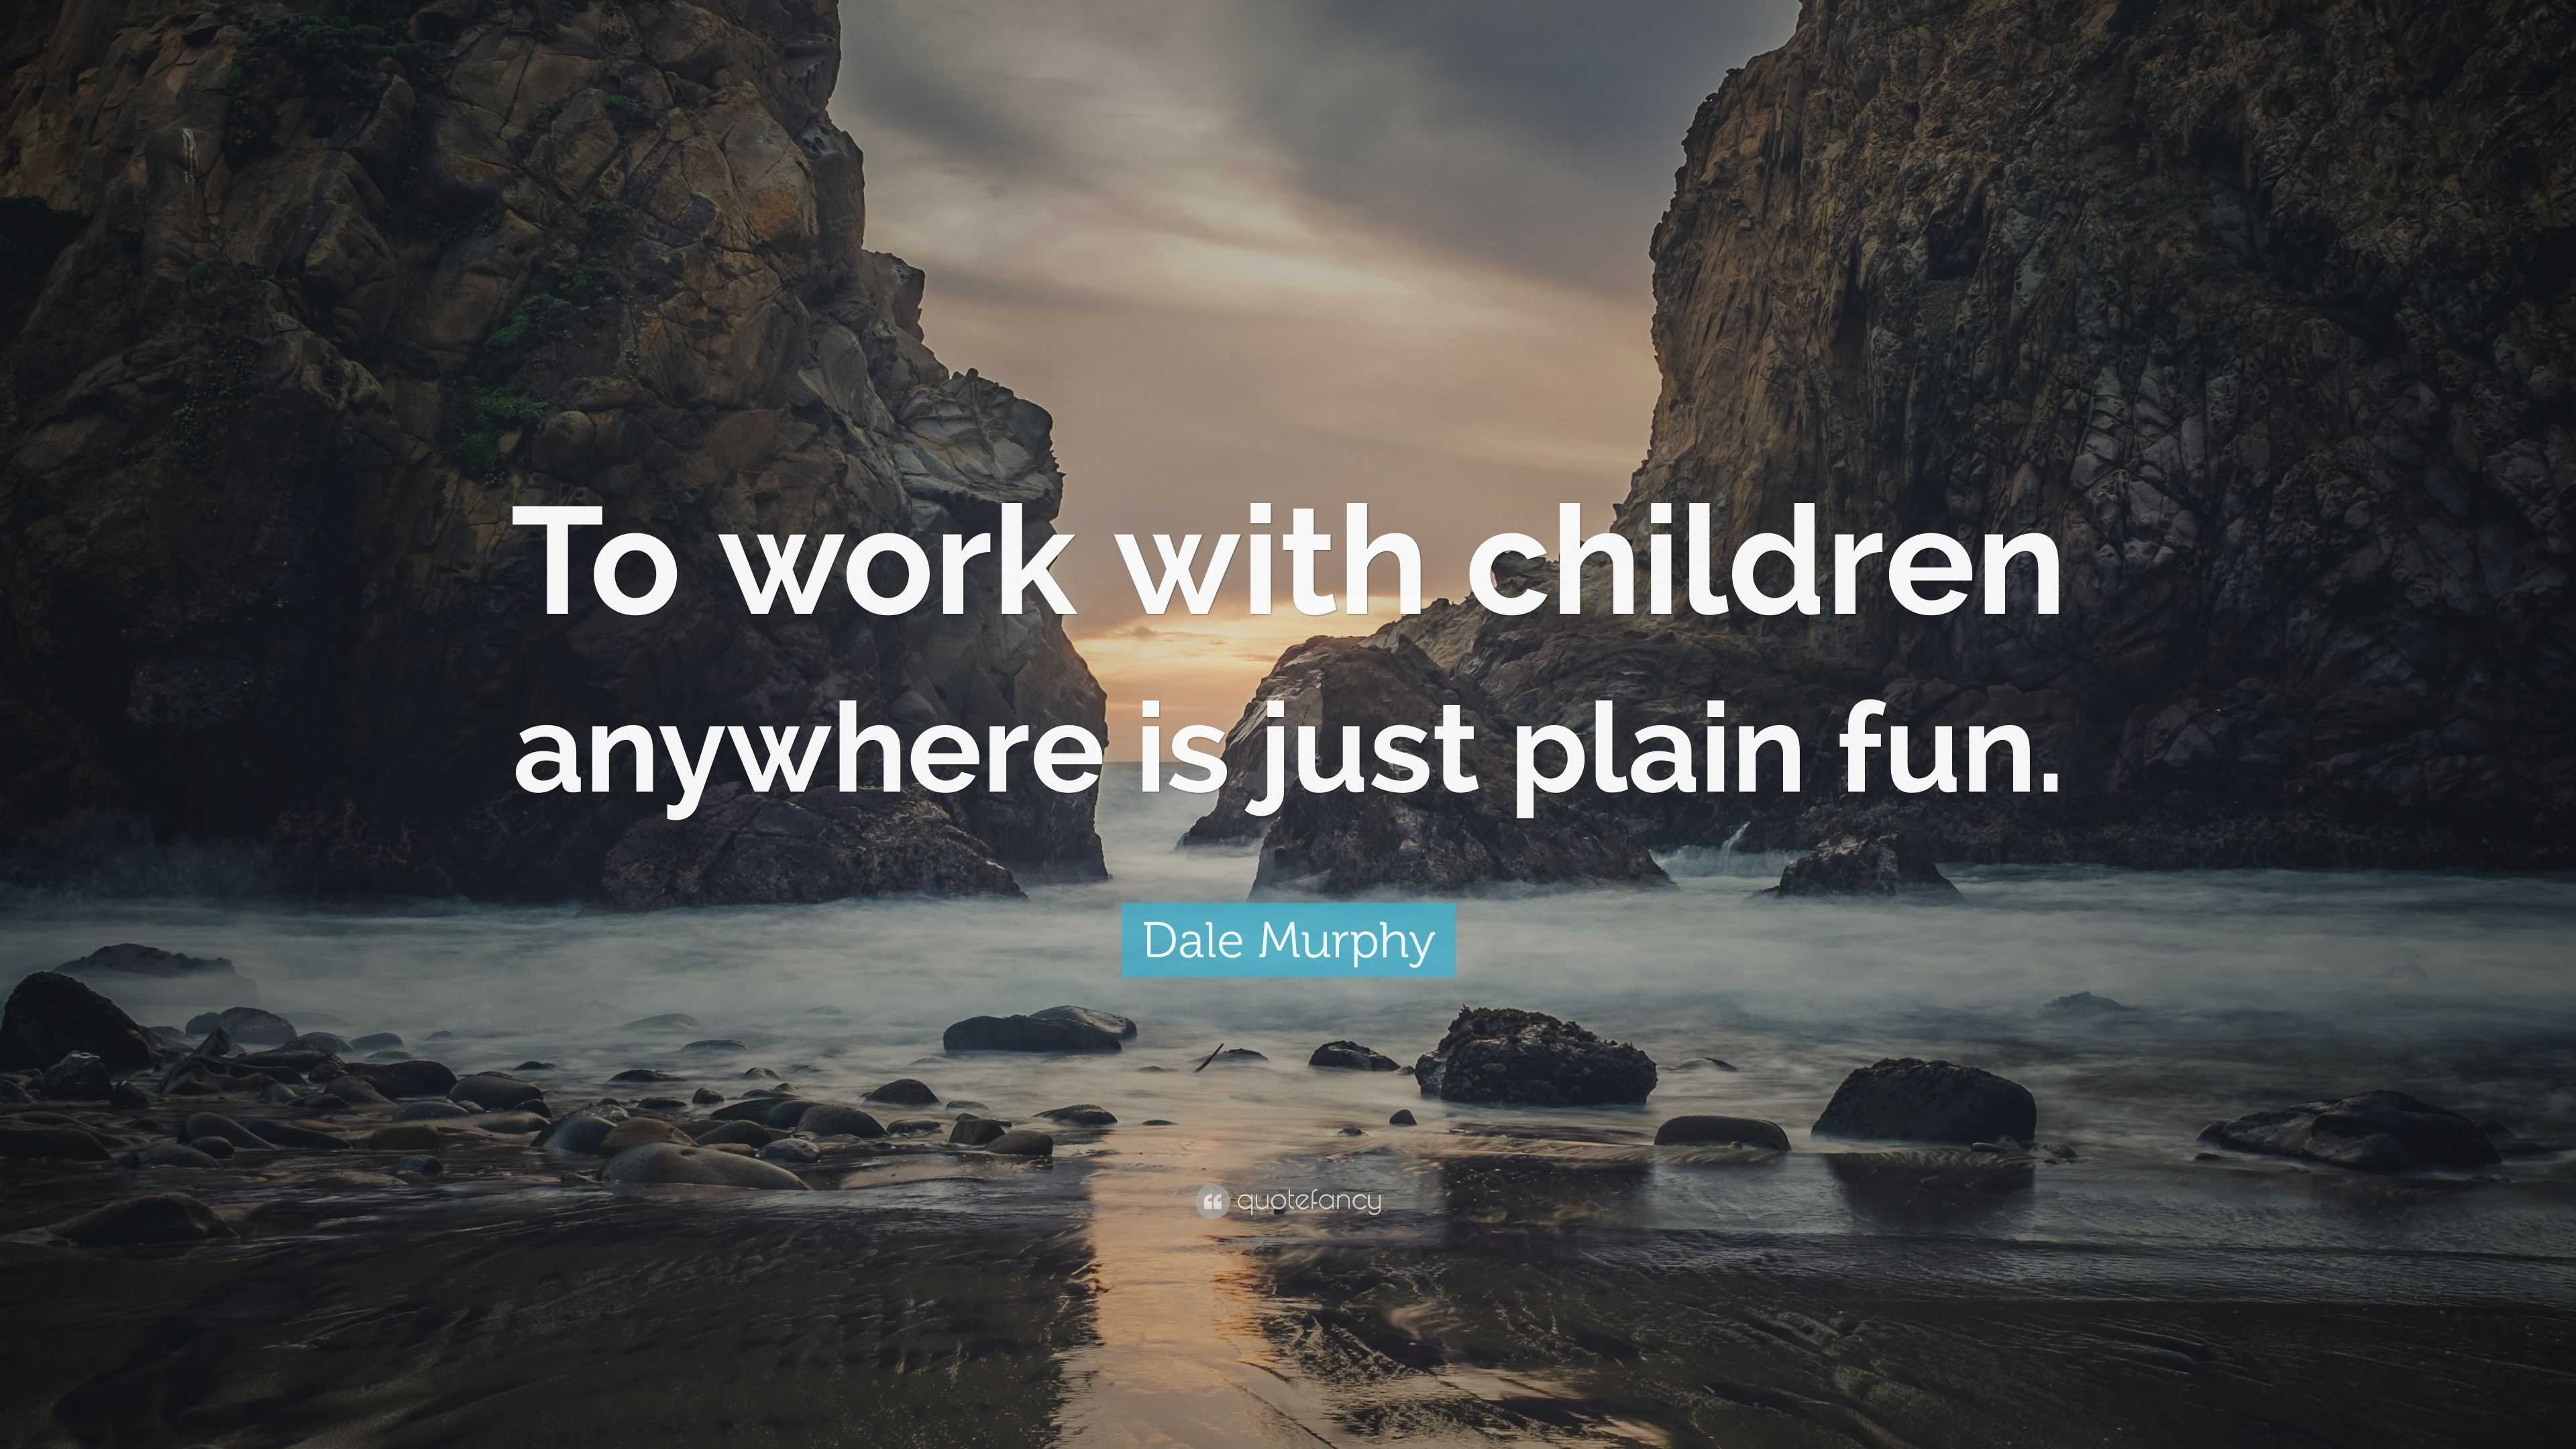 Dale Murphy Quote: “To work with children anywhere is just plain fun.”